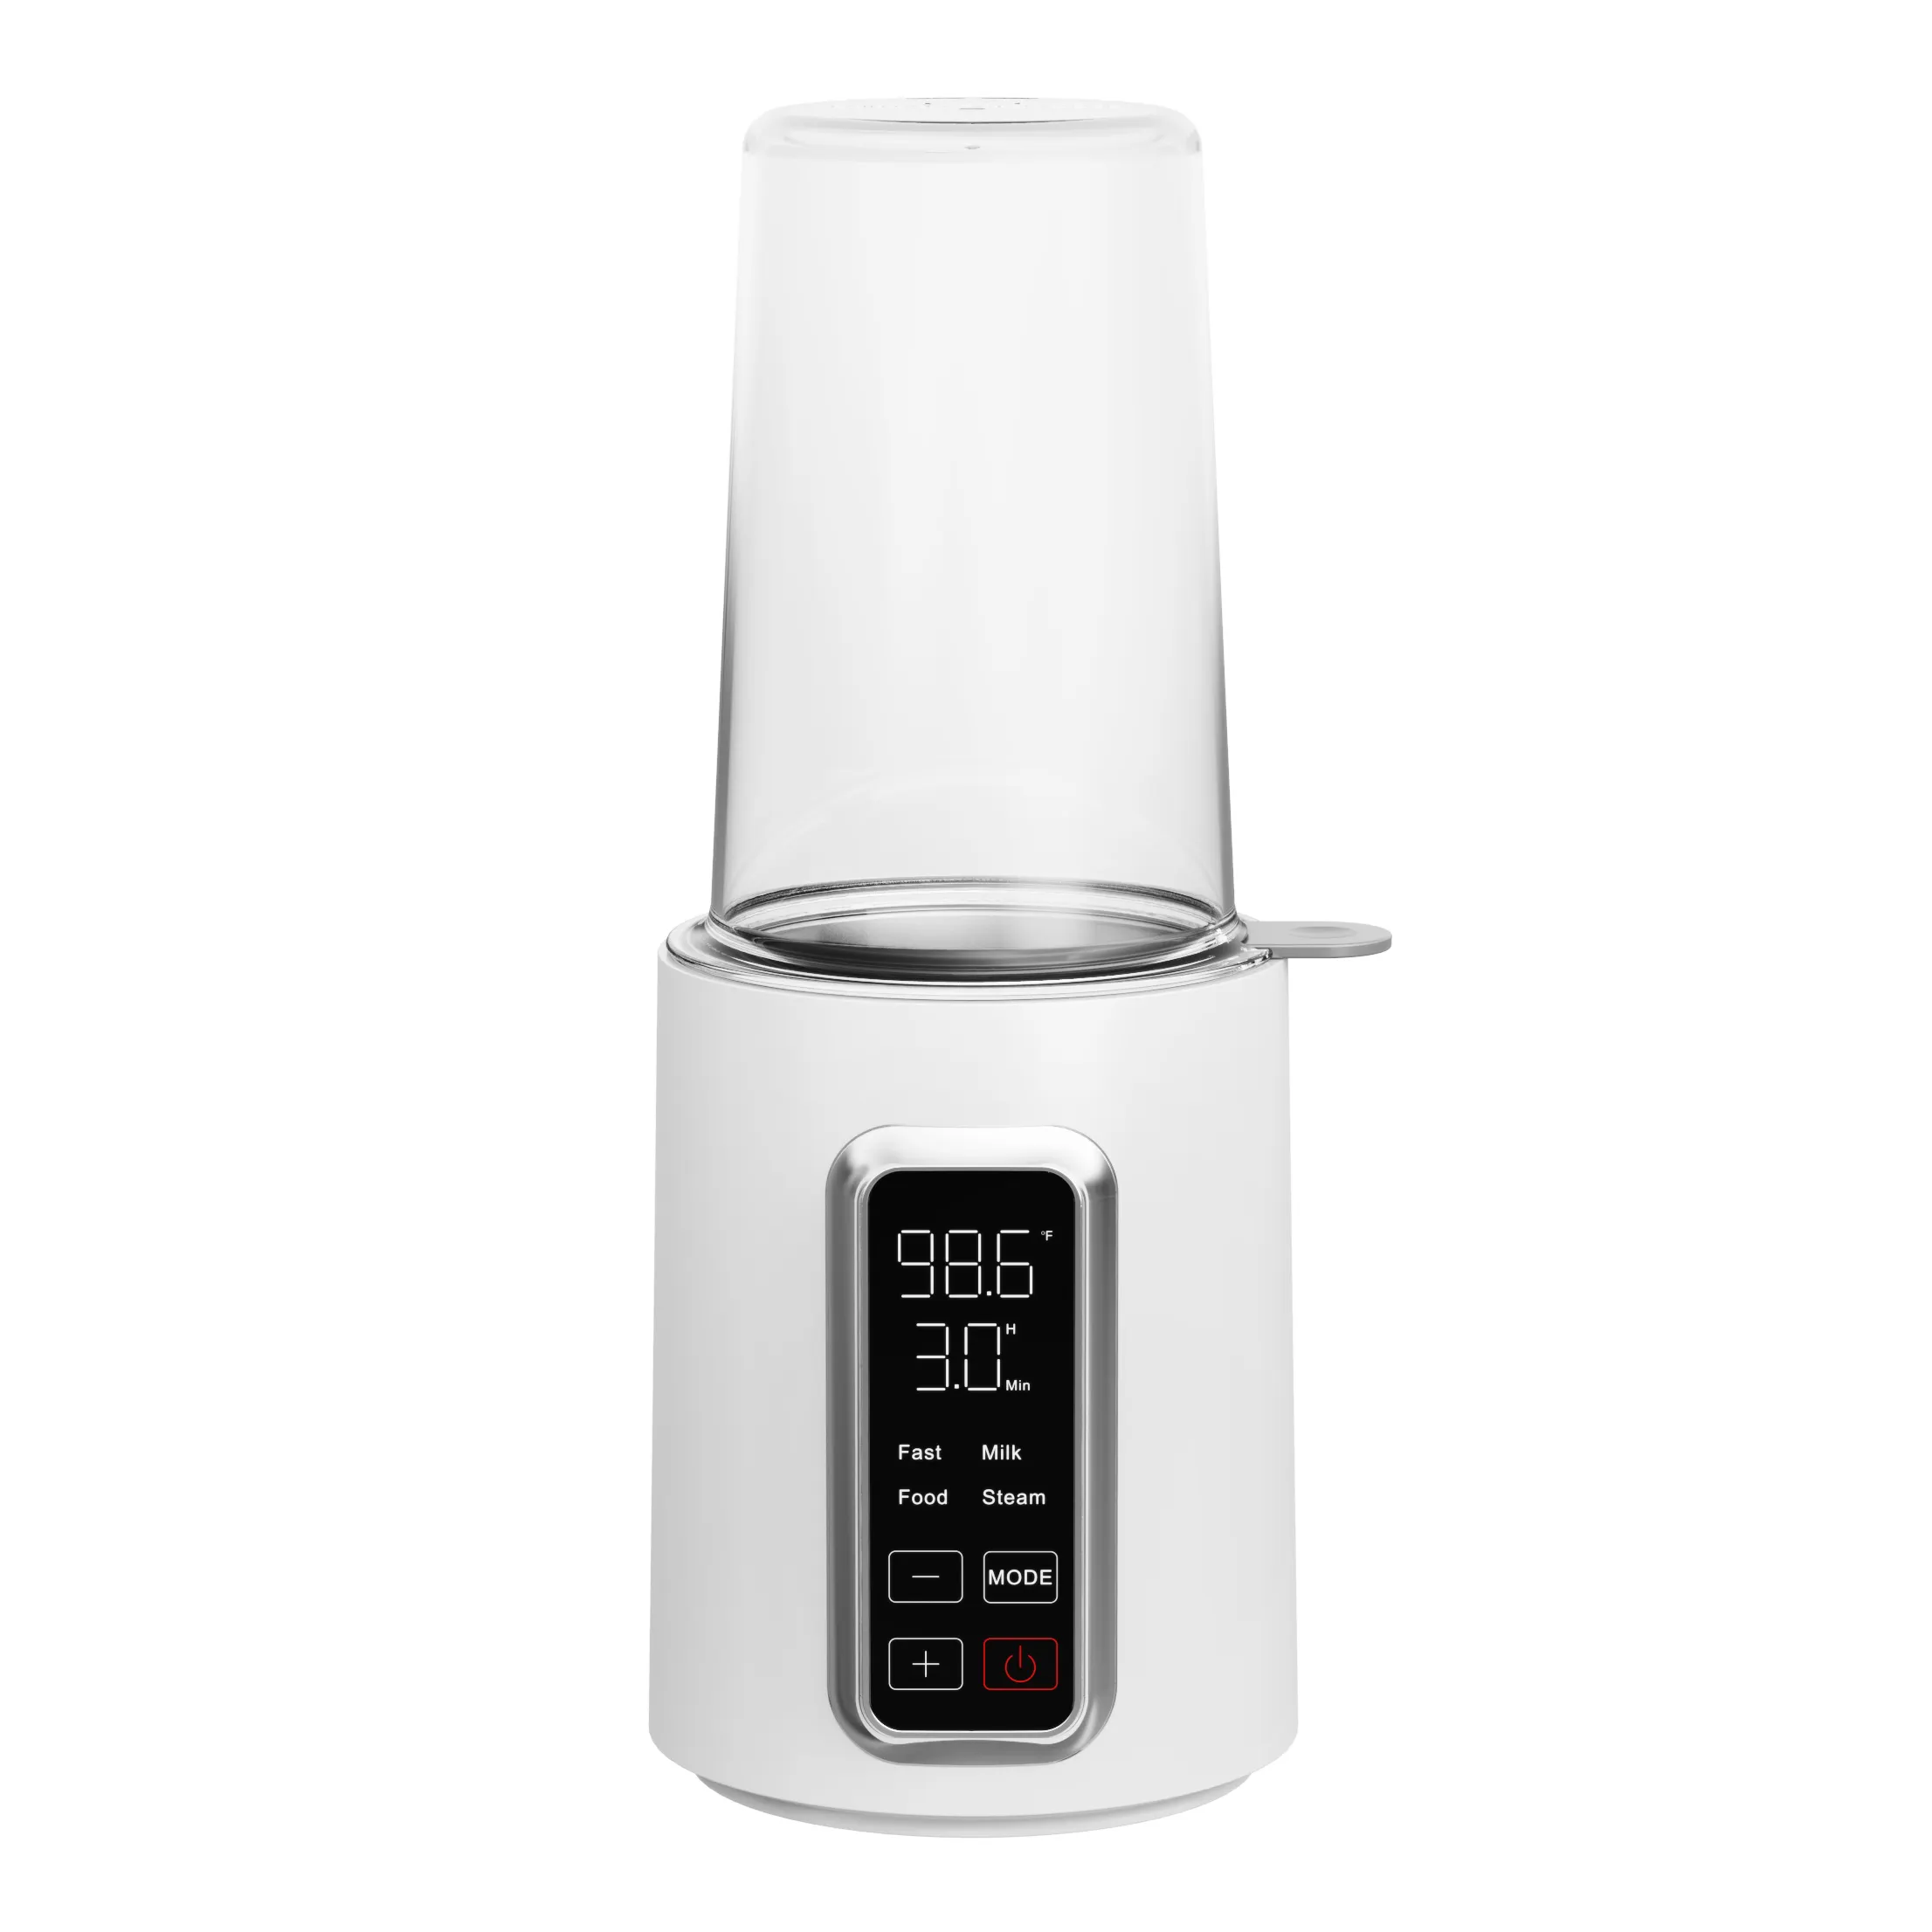 4-in-1 New Design Constant Warming Bottle Warmer Food Heater with Fast heating and Sterilizing function